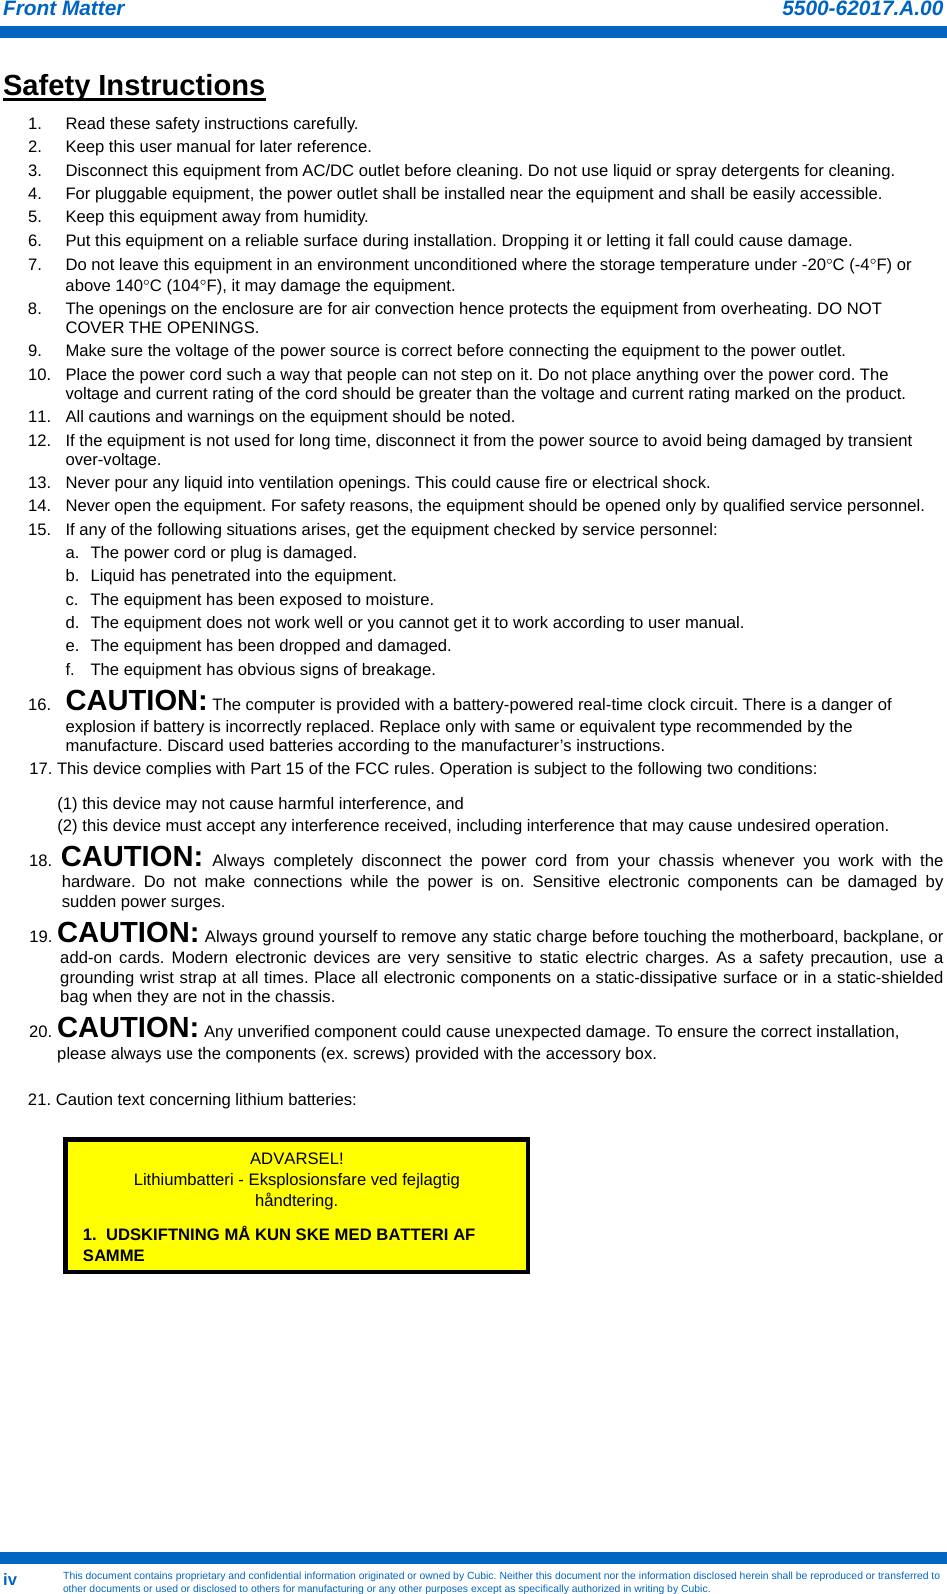 Front Matter   This document contains proprietary and confidential information originated or owned by Cubic. Neither this document nor the information disclosed herein shall be reproduced or transferred to other documents or used or disclosed to others for manufacturing or any other purposes except as specifically authorized in writing by Cubic. 5500-62017.A.00iv Safety Instructions                                  1.  Read these safety instructions carefully. 2.  Keep this user manual for later reference. 3.  Disconnect this equipment from AC/DC outlet before cleaning. Do not use liquid or spray detergents for cleaning.  4.  For pluggable equipment, the power outlet shall be installed near the equipment and shall be easily accessible. 5.  Keep this equipment away from humidity. 6.  Put this equipment on a reliable surface during installation. Dropping it or letting it fall could cause damage. 7.  Do not leave this equipment in an environment unconditioned where the storage temperature under -20°C (-4°F) or above 140°C (104°F), it may damage the equipment. 8.  The openings on the enclosure are for air convection hence protects the equipment from overheating. DO NOT COVER THE OPENINGS. 9.  Make sure the voltage of the power source is correct before connecting the equipment to the power outlet. 10.  Place the power cord such a way that people can not step on it. Do not place anything over the power cord. The voltage and current rating of the cord should be greater than the voltage and current rating marked on the product. 11.  All cautions and warnings on the equipment should be noted. 12.  If the equipment is not used for long time, disconnect it from the power source to avoid being damaged by transient over-voltage. 13.  Never pour any liquid into ventilation openings. This could cause fire or electrical shock. 14.  Never open the equipment. For safety reasons, the equipment should be opened only by qualified service personnel. 15.  If any of the following situations arises, get the equipment checked by service personnel: a.  The power cord or plug is damaged. b.  Liquid has penetrated into the equipment. c.  The equipment has been exposed to moisture. d.  The equipment does not work well or you cannot get it to work according to user manual. e.  The equipment has been dropped and damaged. f.  The equipment has obvious signs of breakage. 16.  CAUTION: The computer is provided with a battery-powered real-time clock circuit. There is a danger of explosion if battery is incorrectly replaced. Replace only with same or equivalent type recommended by the manufacture. Discard used batteries according to the manufacturer’s instructions. 17. This device complies with Part 15 of the FCC rules. Operation is subject to the following two conditions:  (1) this device may not cause harmful interference, and  (2) this device must accept any interference received, including interference that may cause undesired operation. 18.  CAUTION: Always completely disconnect the power cord from your chassis whenever you work with the hardware. Do not make connections while the power is on. Sensitive electronic components can be damaged by sudden power surges.  19. CAUTION: Always ground yourself to remove any static charge before touching the motherboard, backplane, or add-on cards. Modern electronic devices are very sensitive to static electric charges. As a safety precaution, use a grounding wrist strap at all times. Place all electronic components on a static-dissipative surface or in a static-shielded bag when they are not in the chassis. 20. CAUTION: Any unverified component could cause unexpected damage. To ensure the correct installation, please always use the components (ex. screws) provided with the accessory box.  21. Caution text concerning lithium batteries:          ADVARSEL! Lithiumbatteri - Eksplosionsfare ved fejlagtig håndtering. 1.  UDSKIFTNING MÅ KUN SKE MED BATTERI AF SAMME 